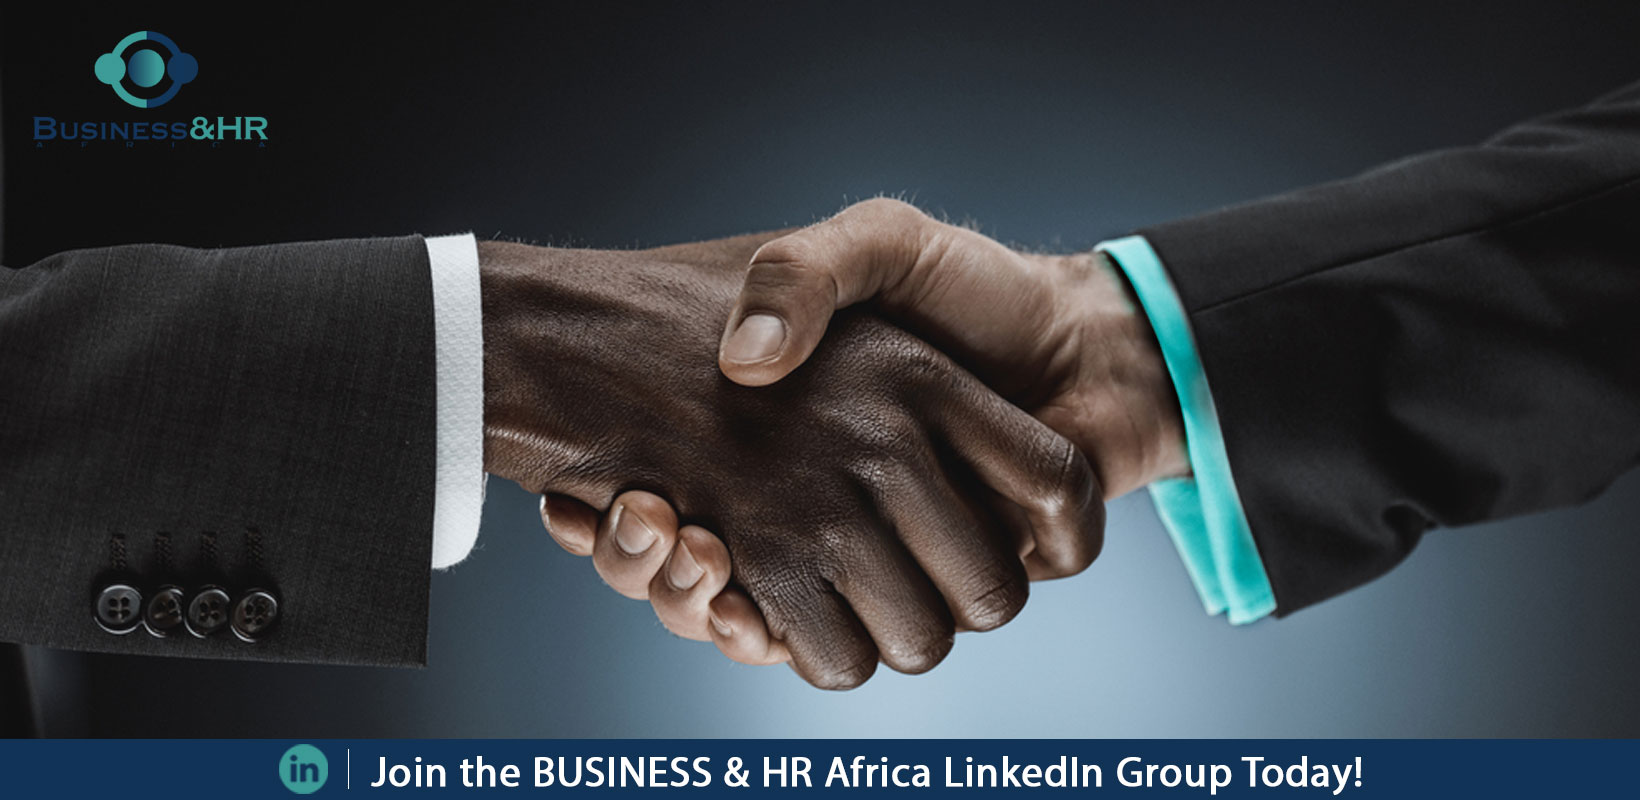 Join the Business & HR Africa LinkedIn Group